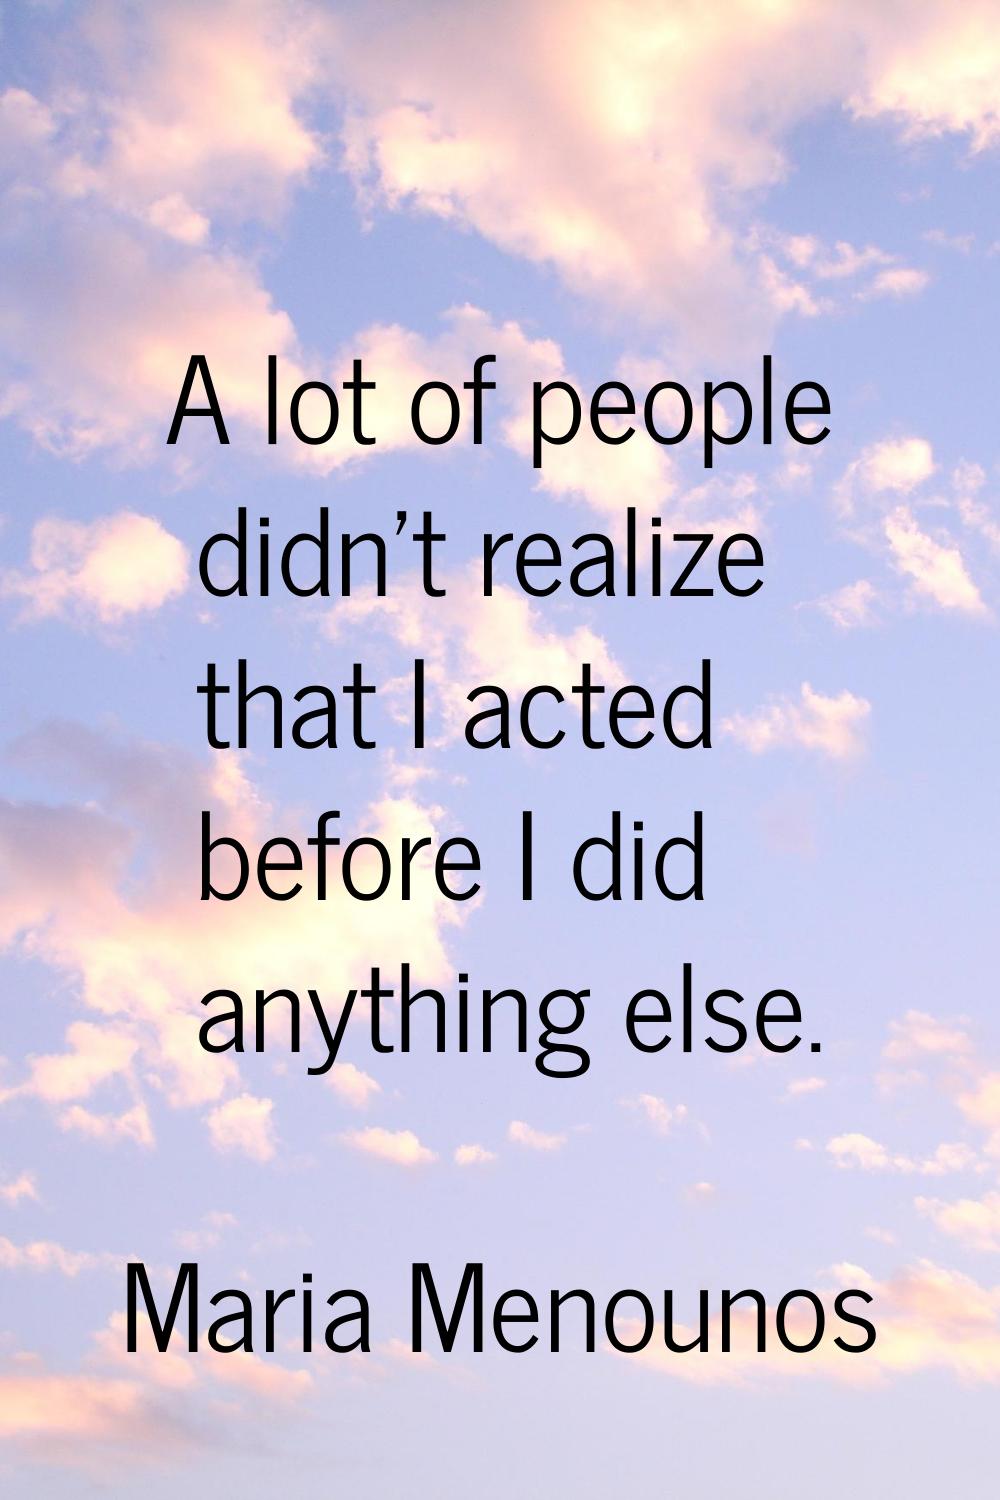 A lot of people didn't realize that I acted before I did anything else.